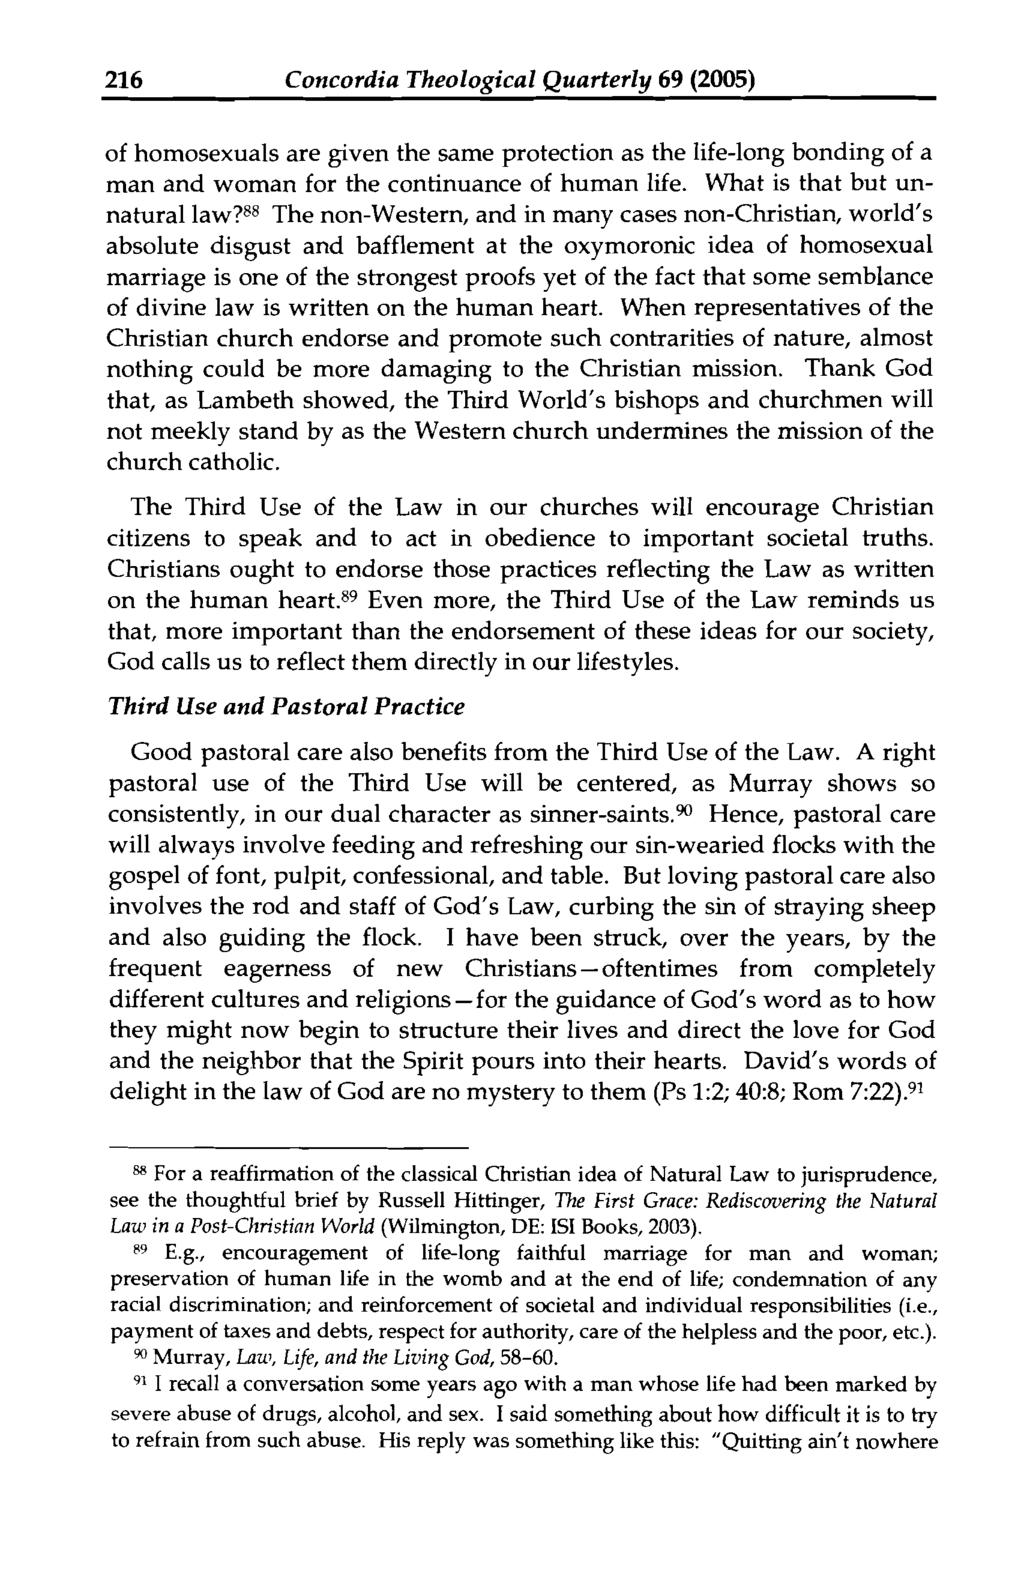 216 Concordia Theological Quarterly 69 (2005) of homosexuals are given the same protection as the life-long bonding of a man and woman for the continuance of human life.